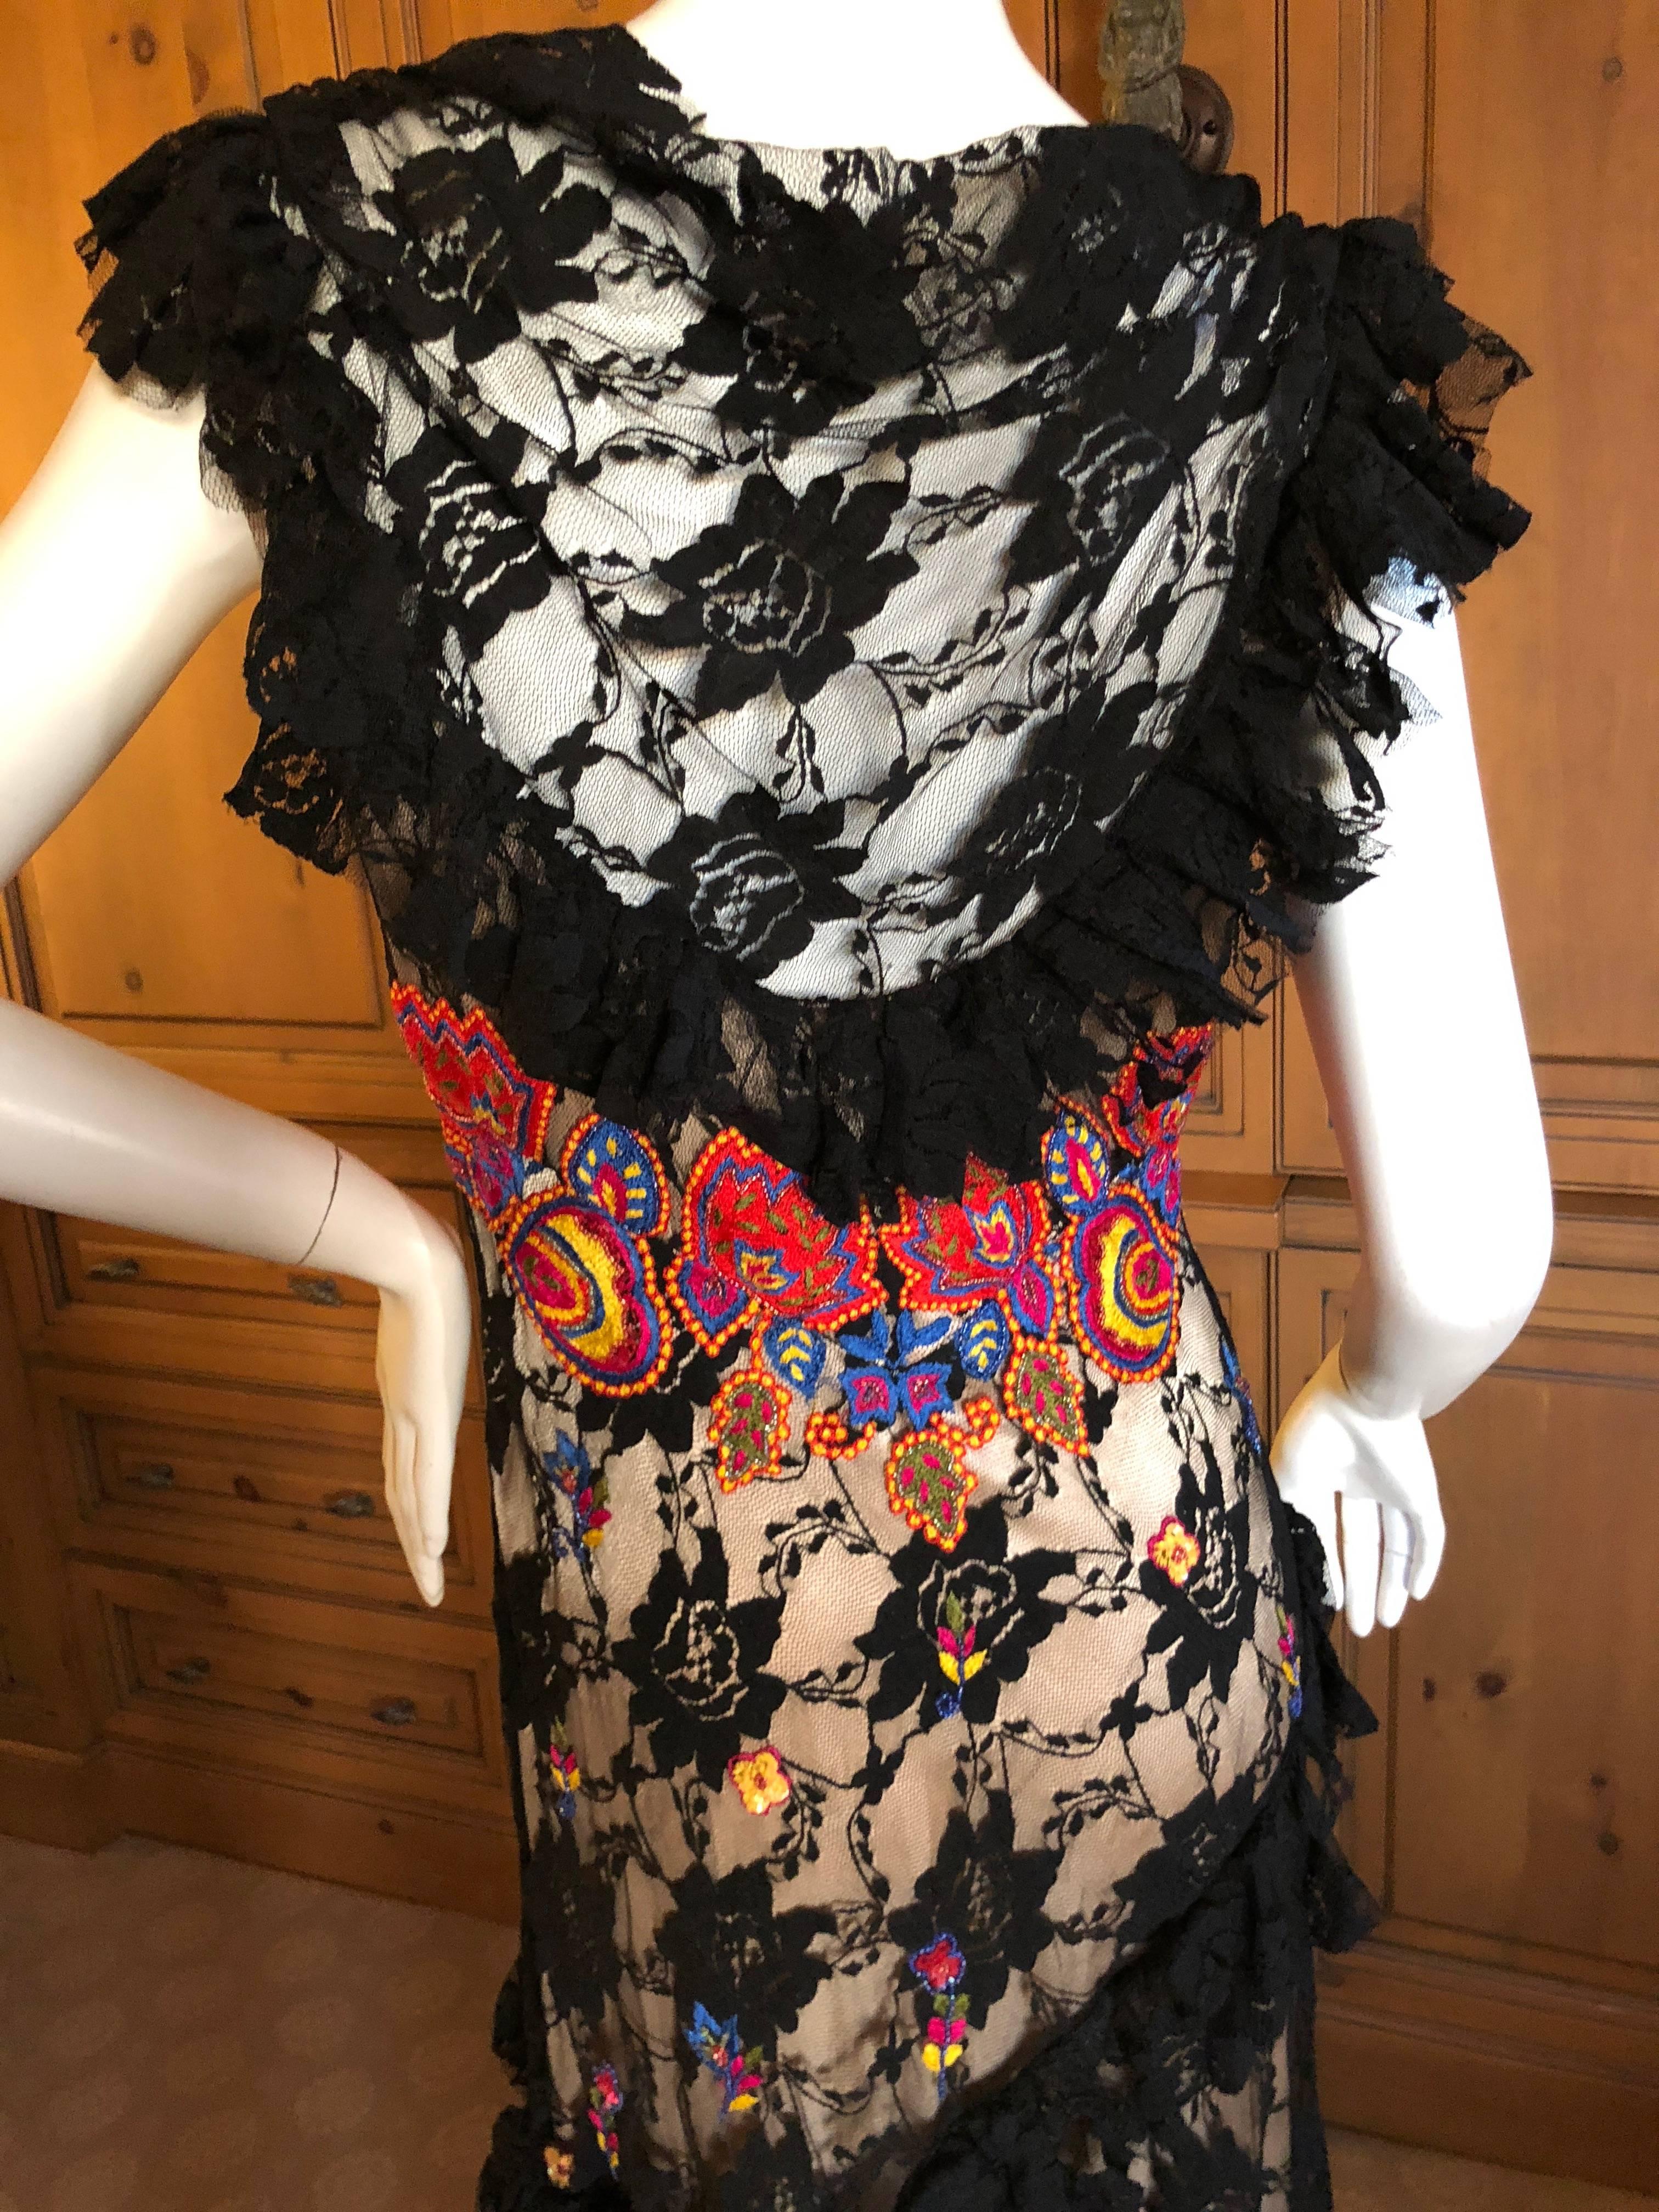  John Galliano amazing lace overlay dress embellished with wild multi color embroidery, and layers of lace ruffles cascading down the skirt.
This is exquisite, I have never seen this dress before, and I love it.
Size 42
 Bust 36